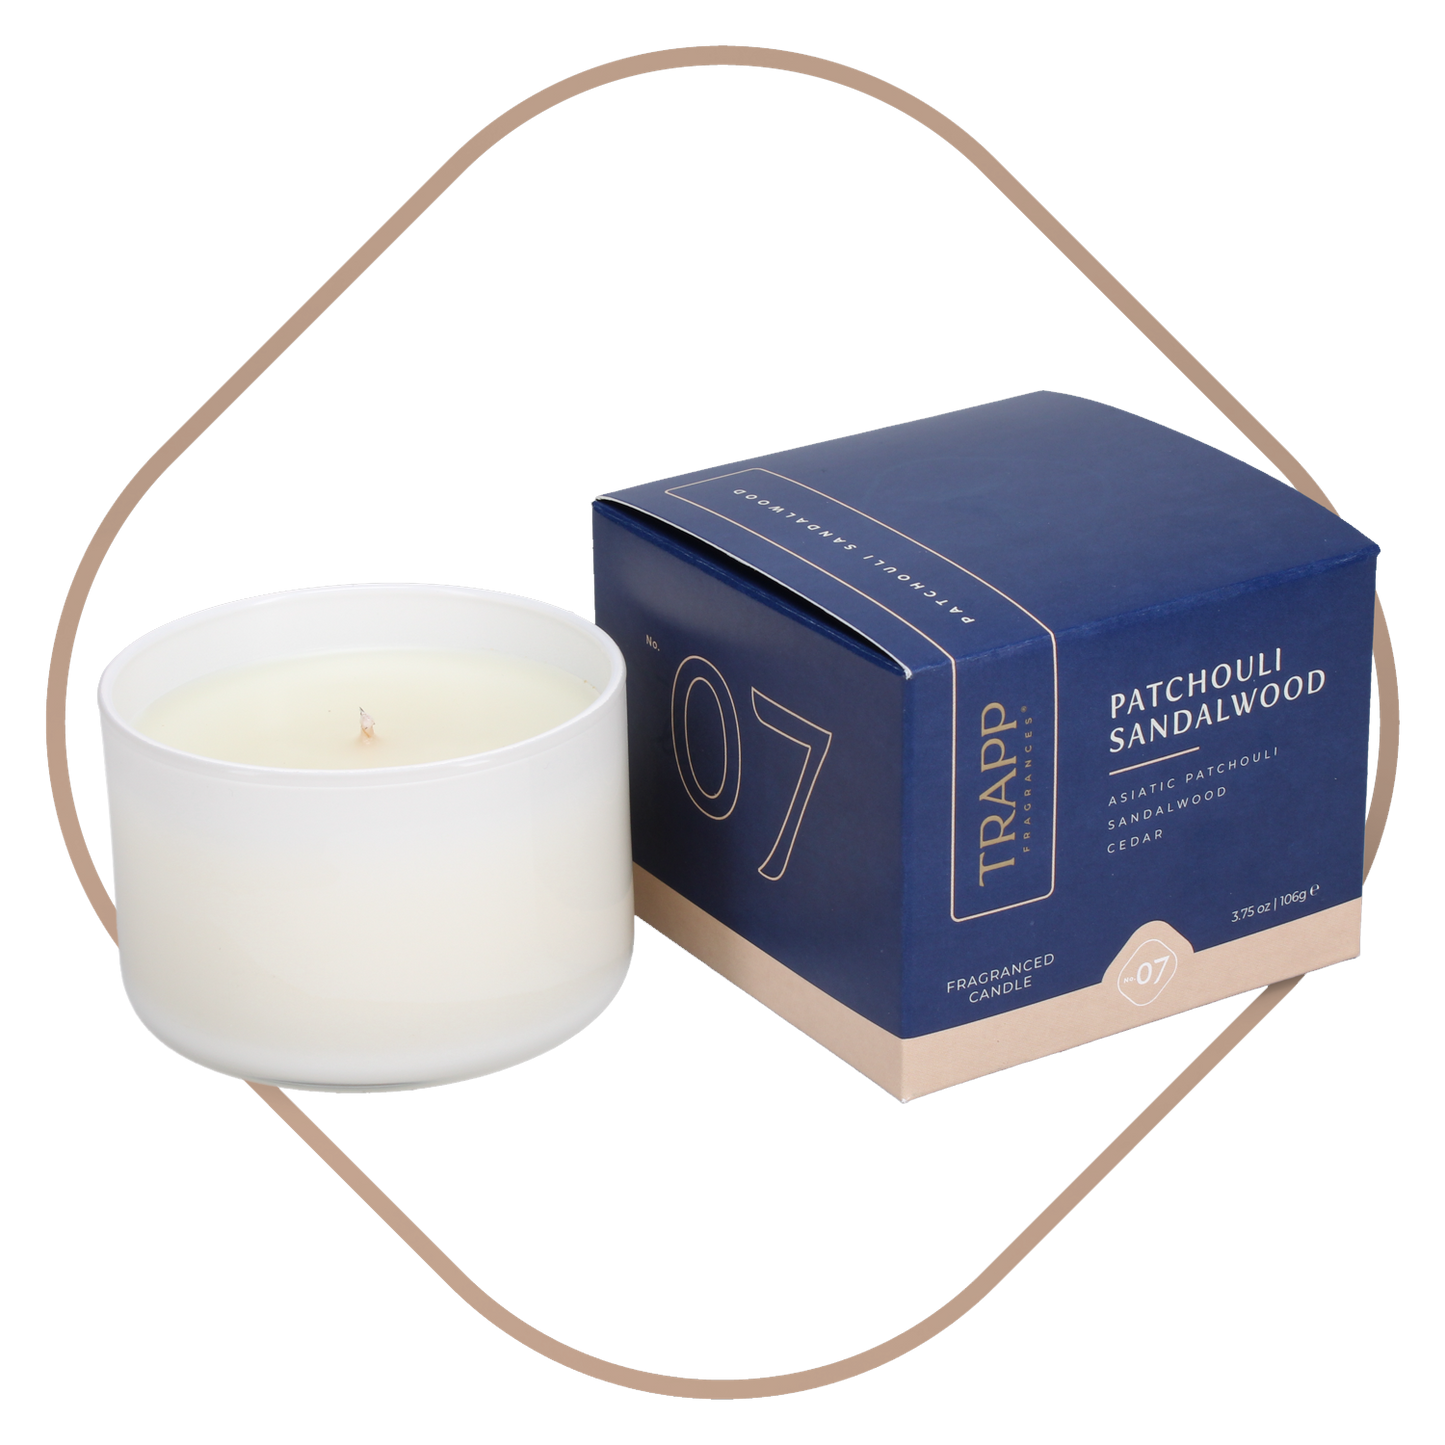 No. 07 Patchouli Sandalwood 3.75 oz. Small Poured Candle